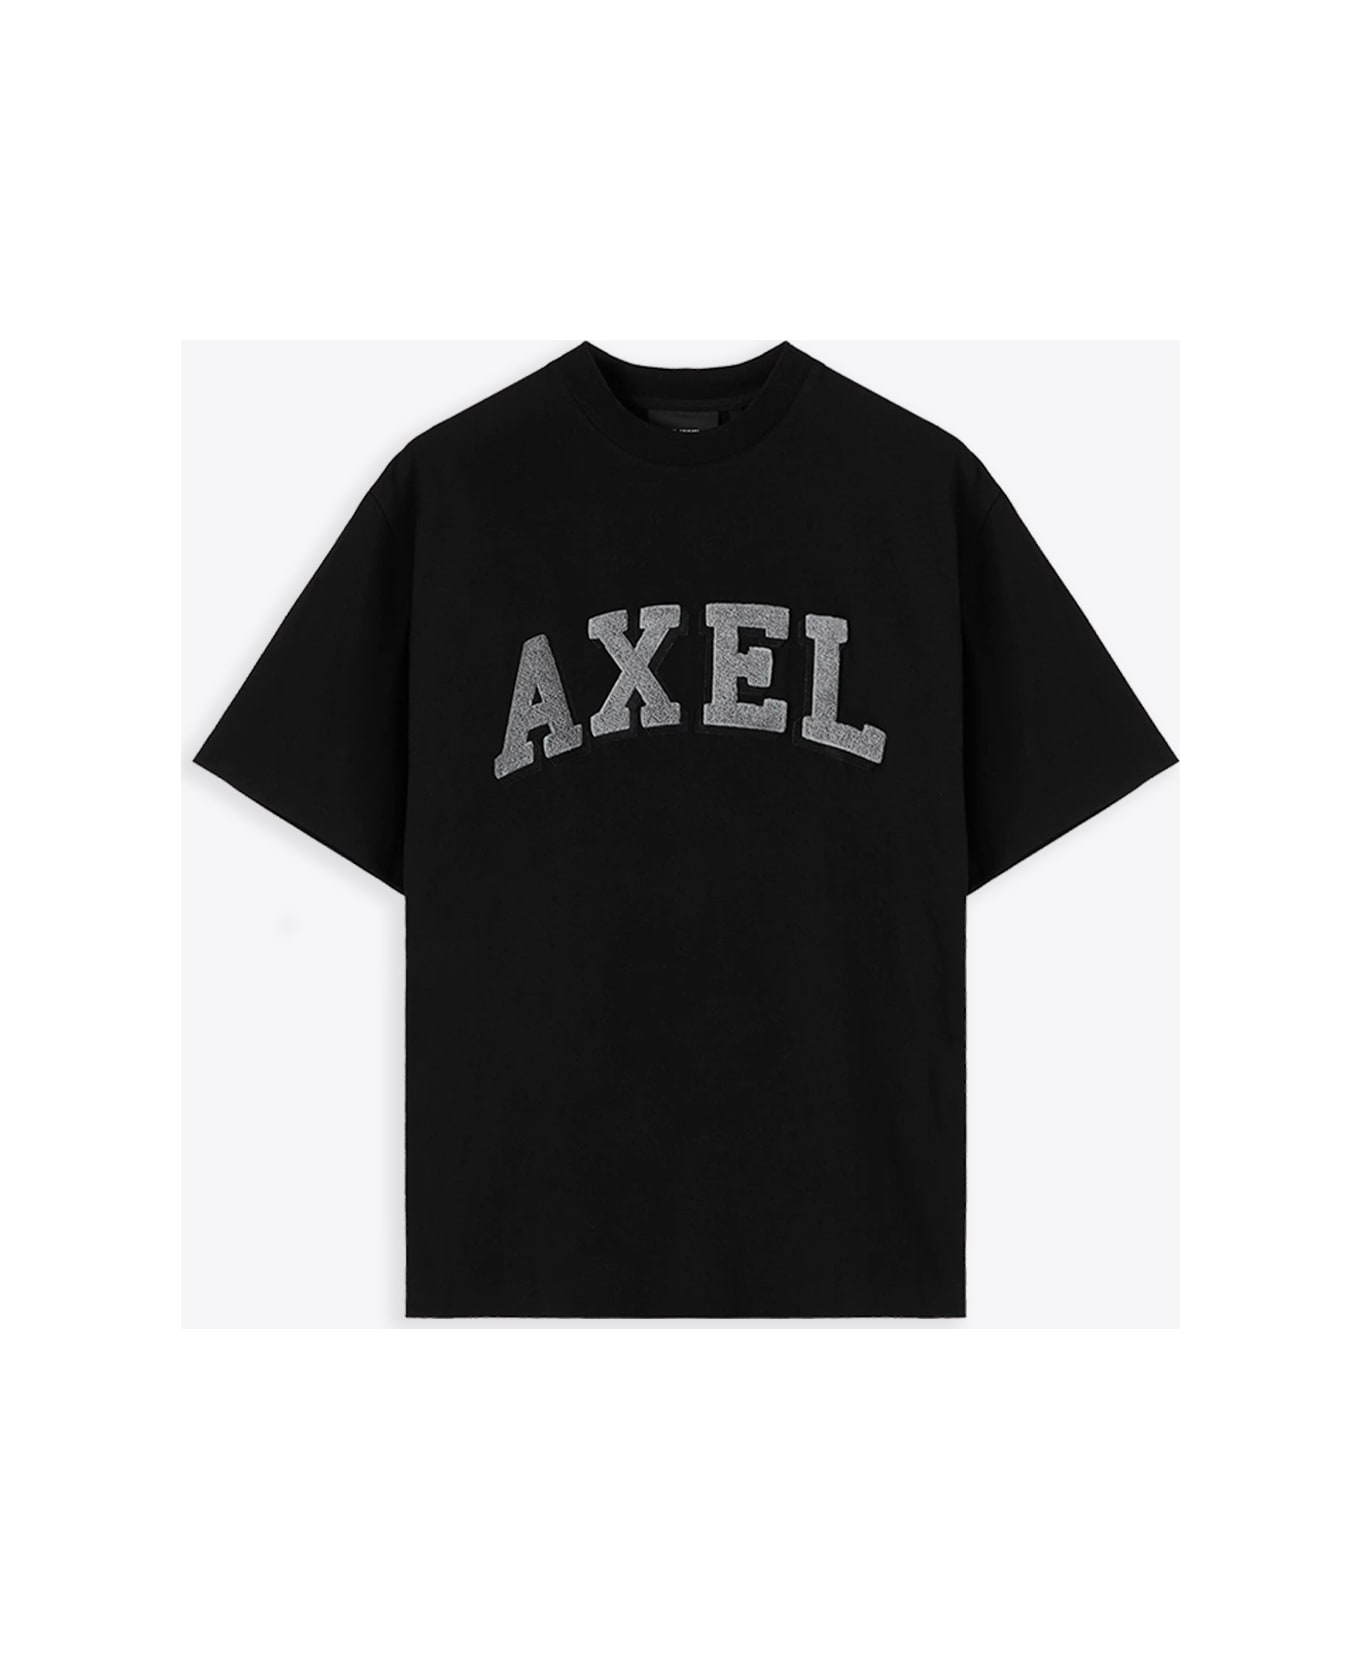 Axel Arigato Axel Arc T-shirt Black t-shirt with arched logo - Axel Arc t-shirt - Nero